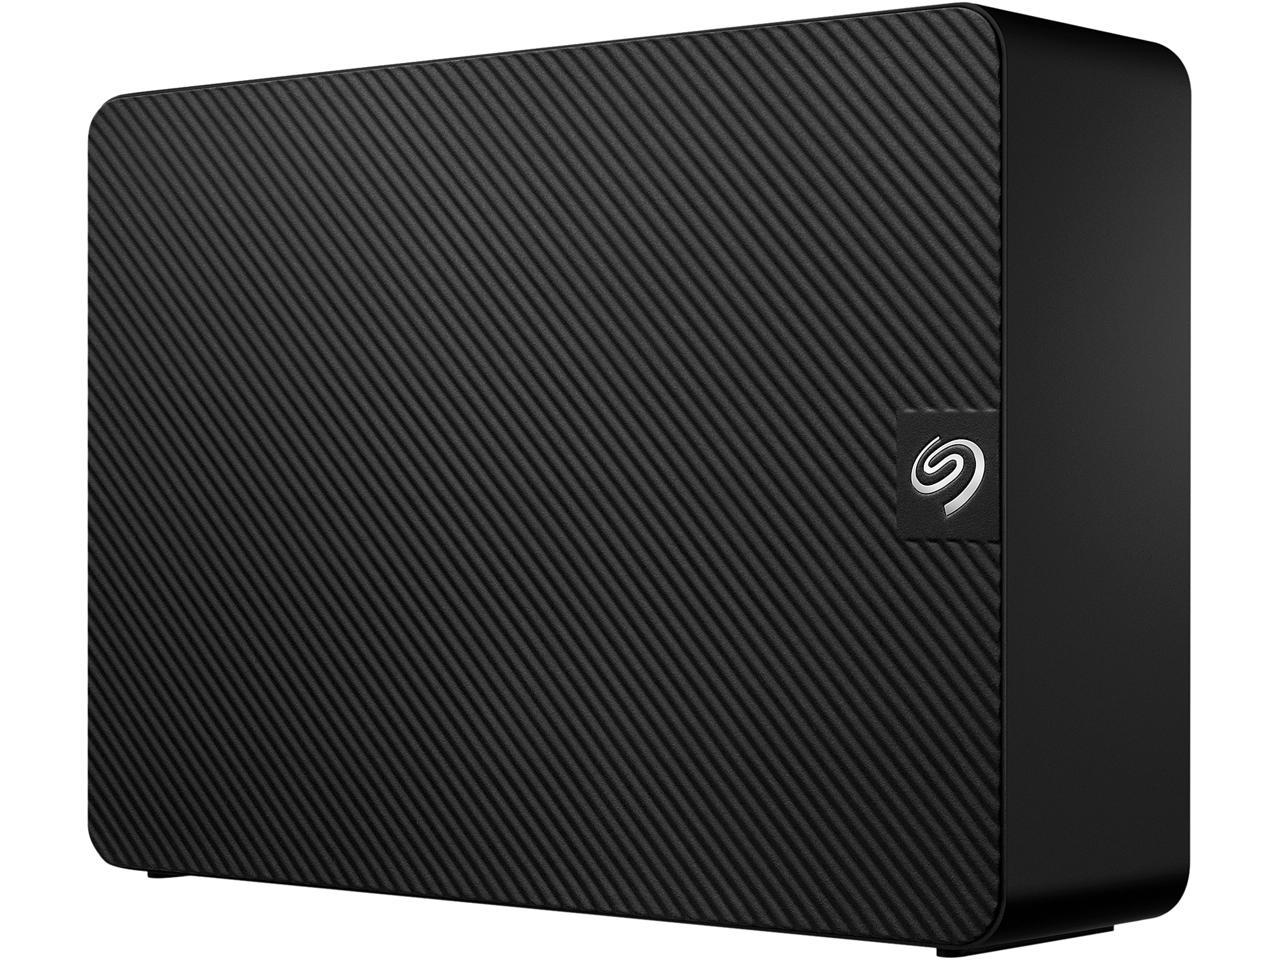 Seagate (STKP6000400) Expansion 6TB External Hard Drive with USB 3.0, Rescue Data Recovery Services